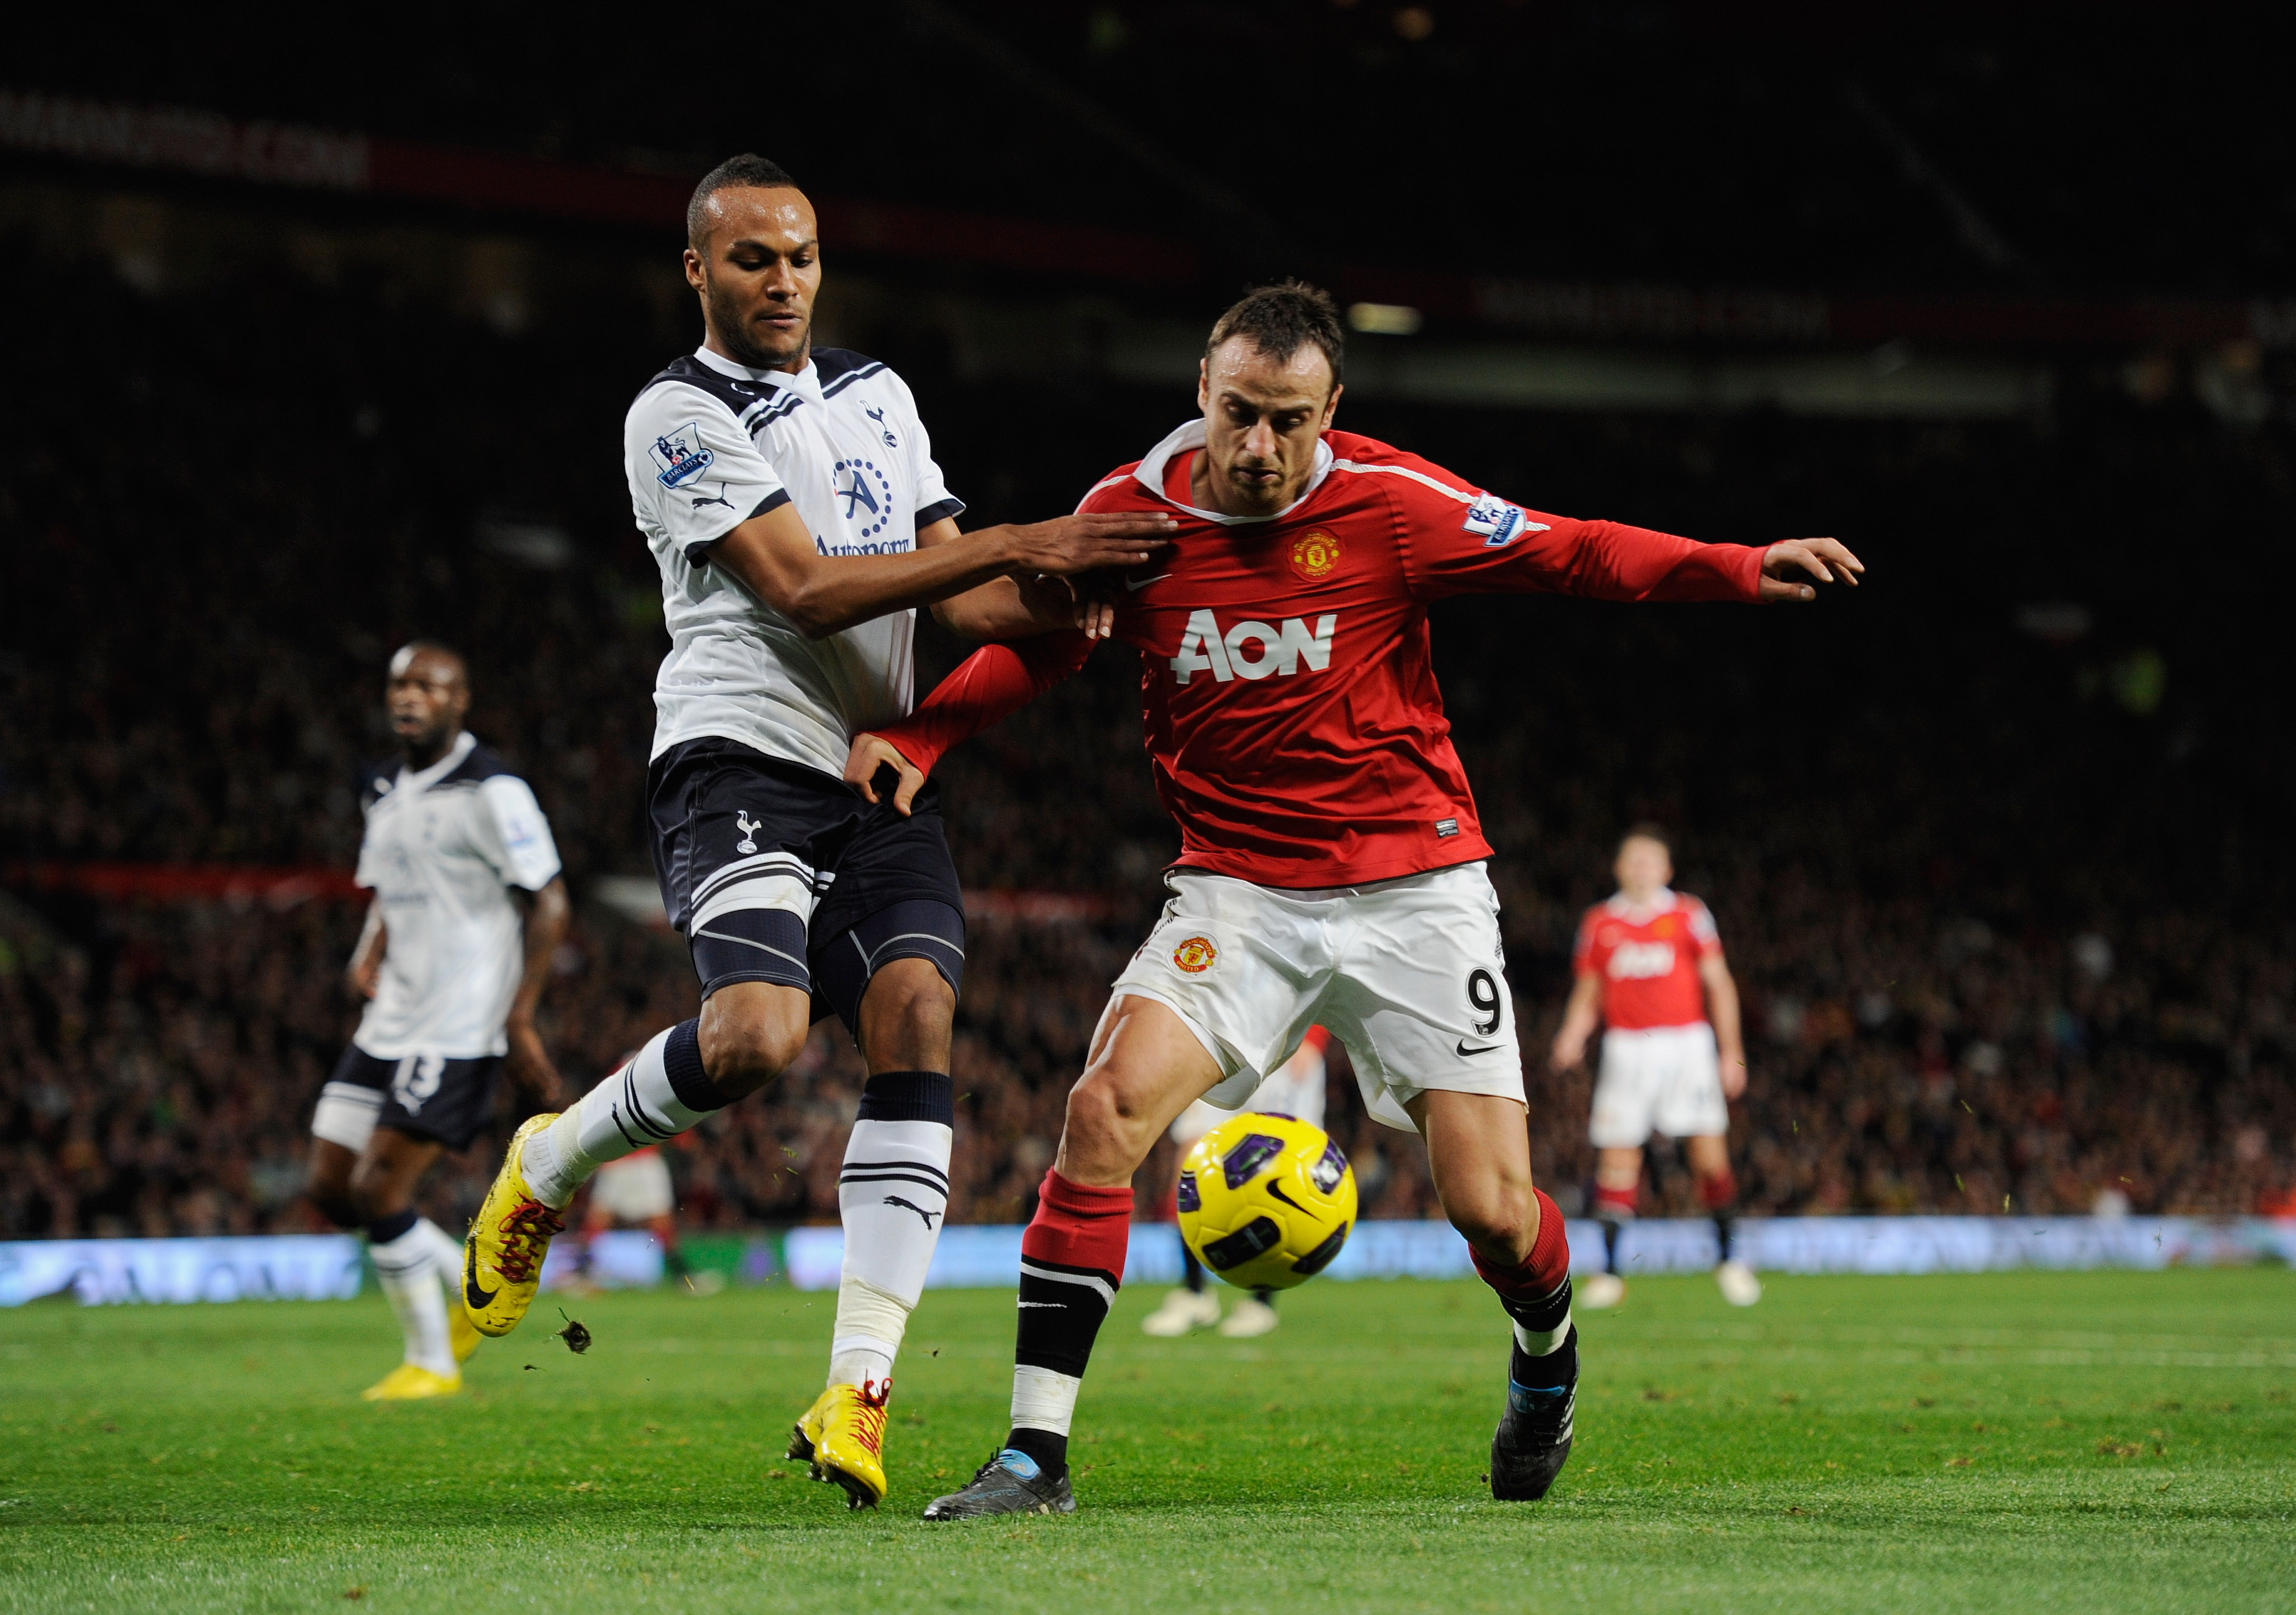 MANCHESTER, ENGLAND - OCTOBER 30: Dimitar Berbatov of Manchester United is challenged by Younes Kaboul of Tottenham during the Barclays Premier League match between Manchester United and Tottenham Hotspur at Old Trafford on October 30, 2010 in Manchester,